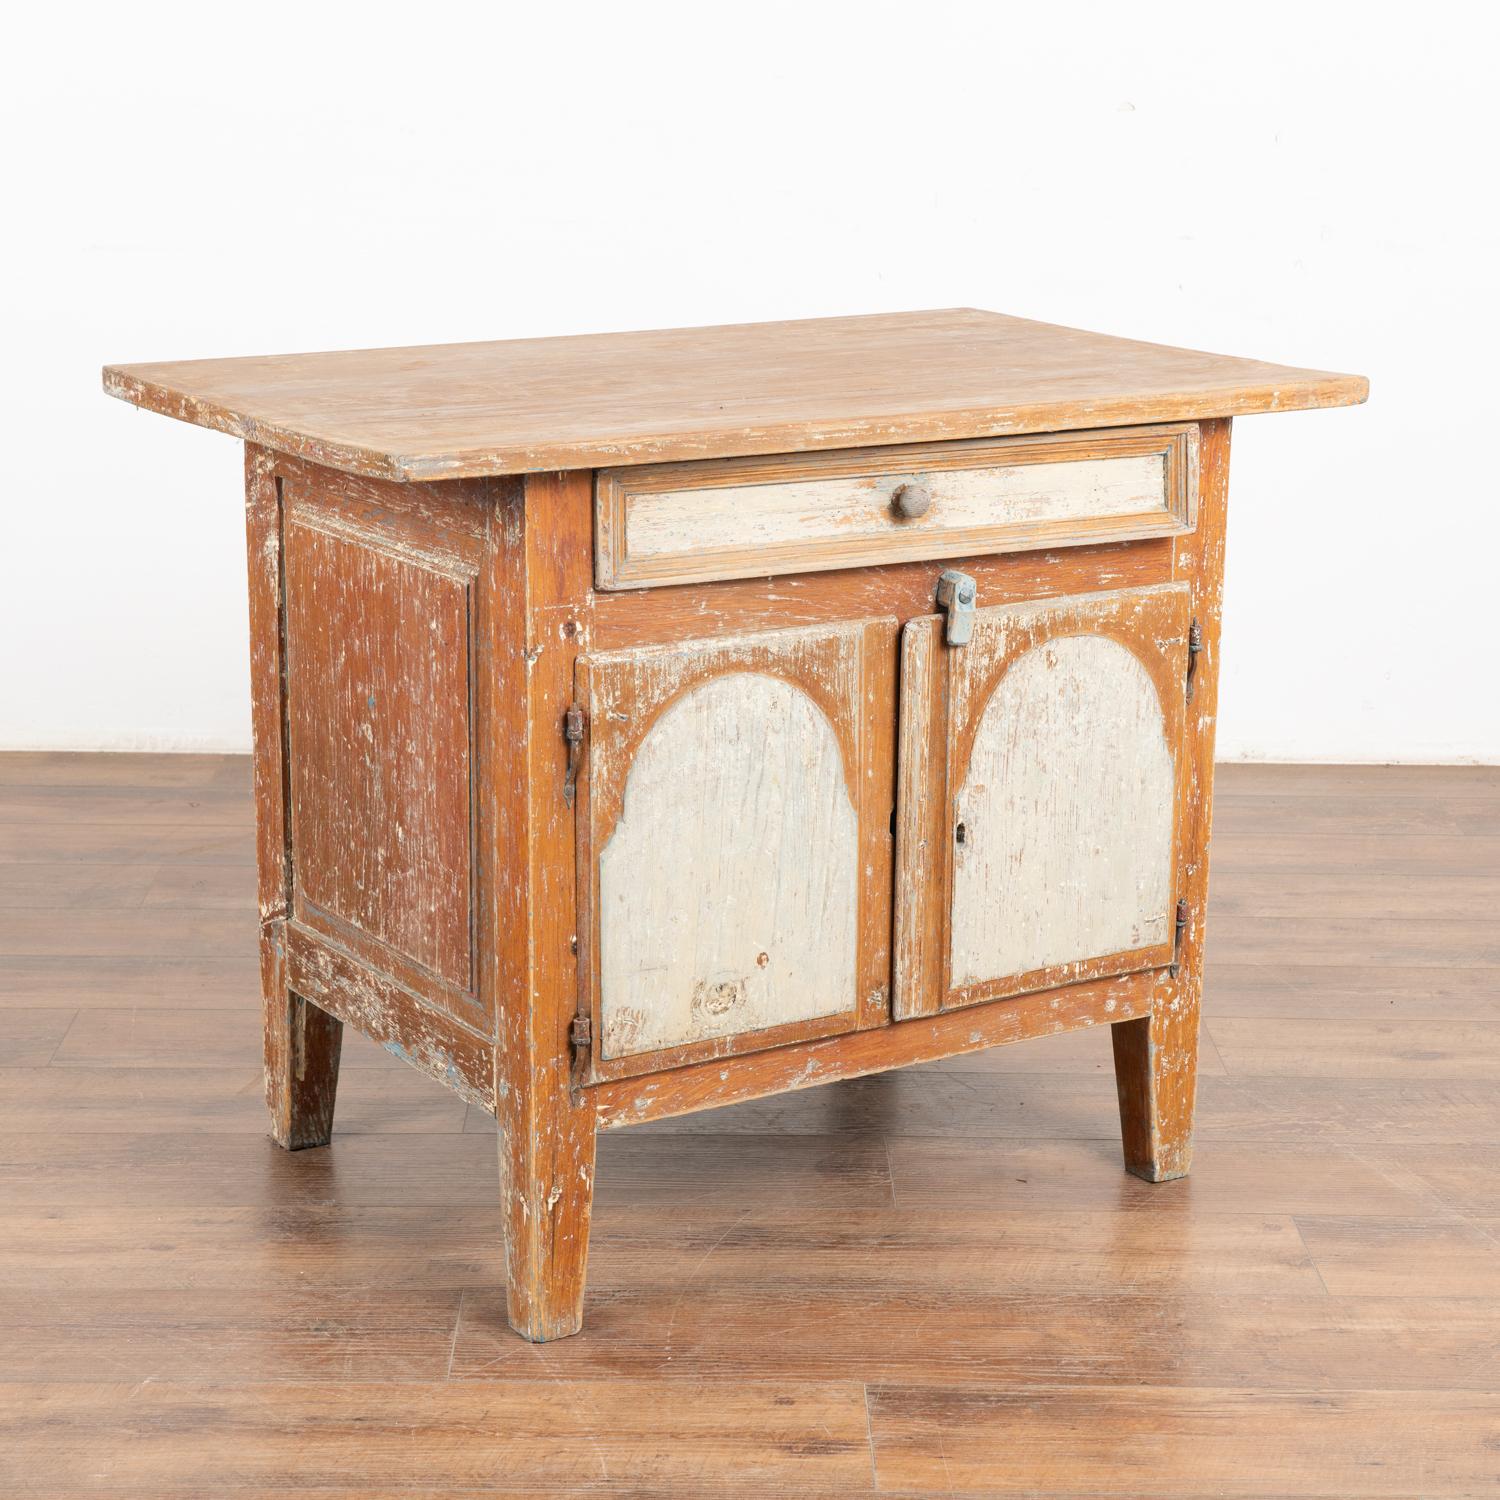 Antique Swedish country pine cabinet or small sideboard with single drawer over two doors.
The original brown and white painted finish reveals traces of blue, and has been distressed over many generations revealing the warm, natural pine patina